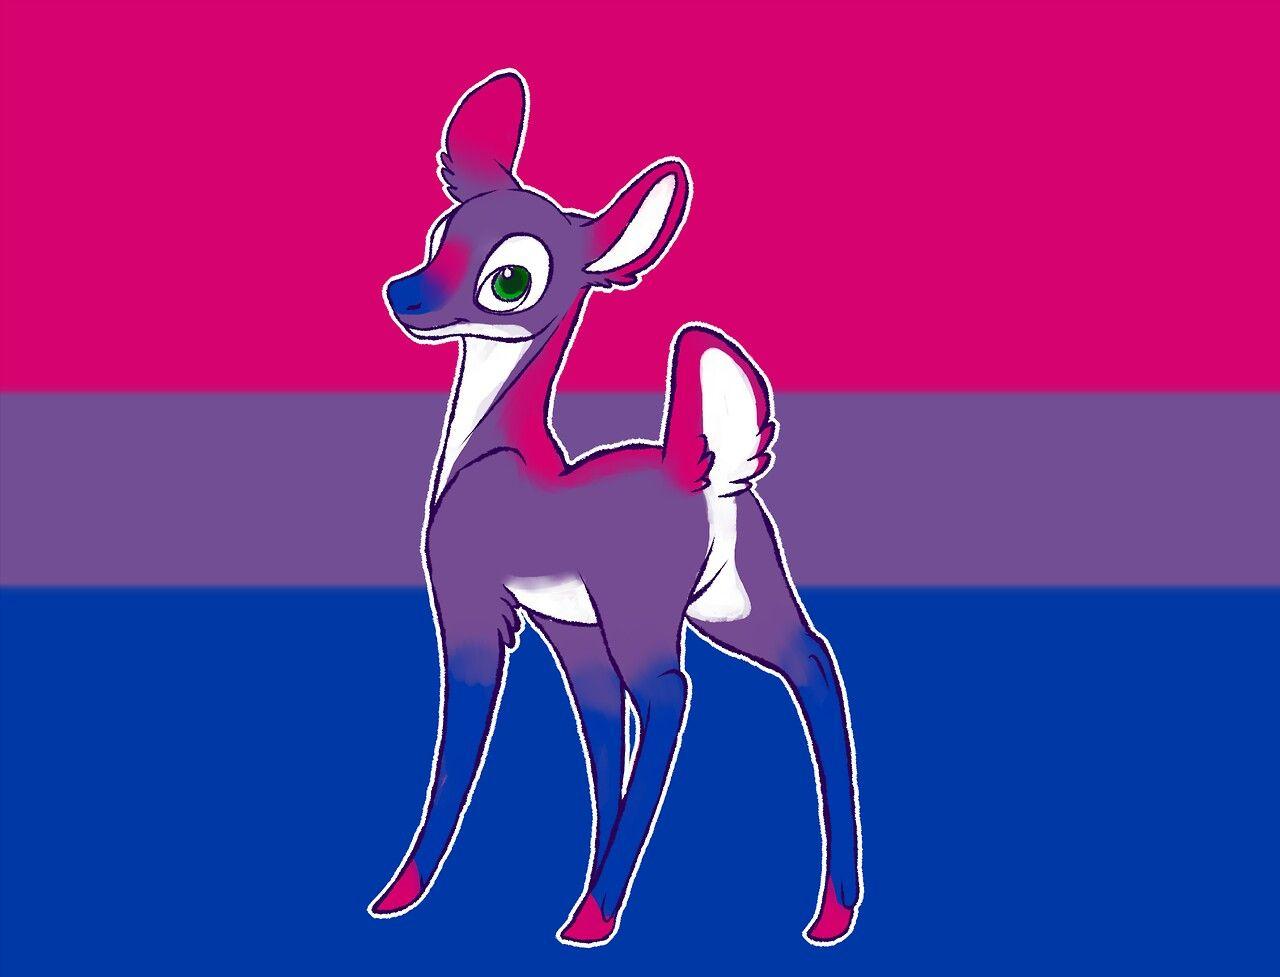 OMFG. SOOOO CUTE. I SUPPORT BISEXUALITY, FOR SURE!!!